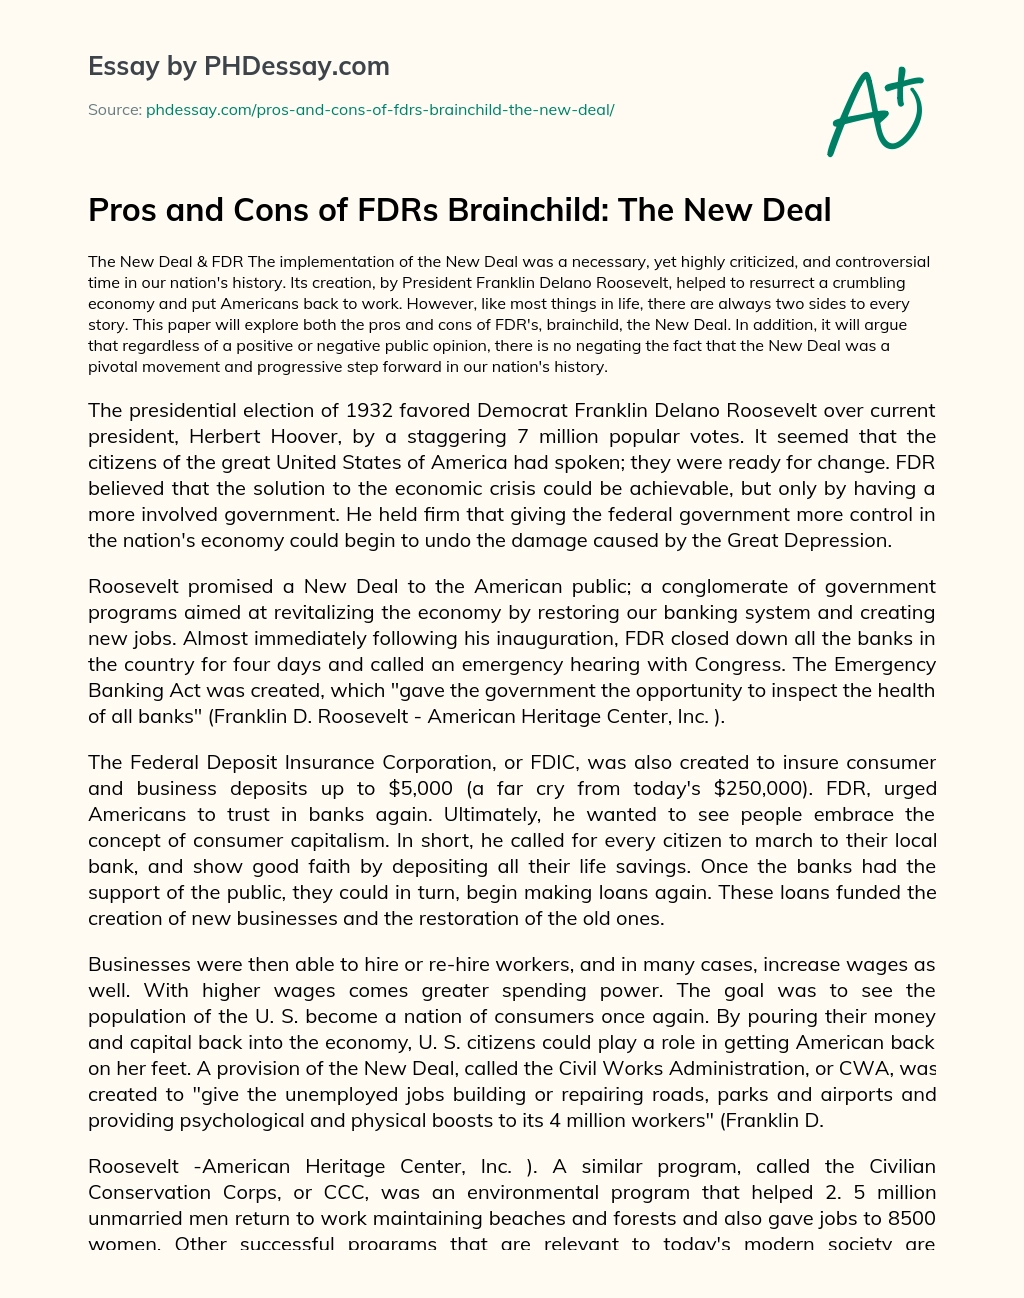 Pros and Cons of FDRs Brainchild: The New Deal essay